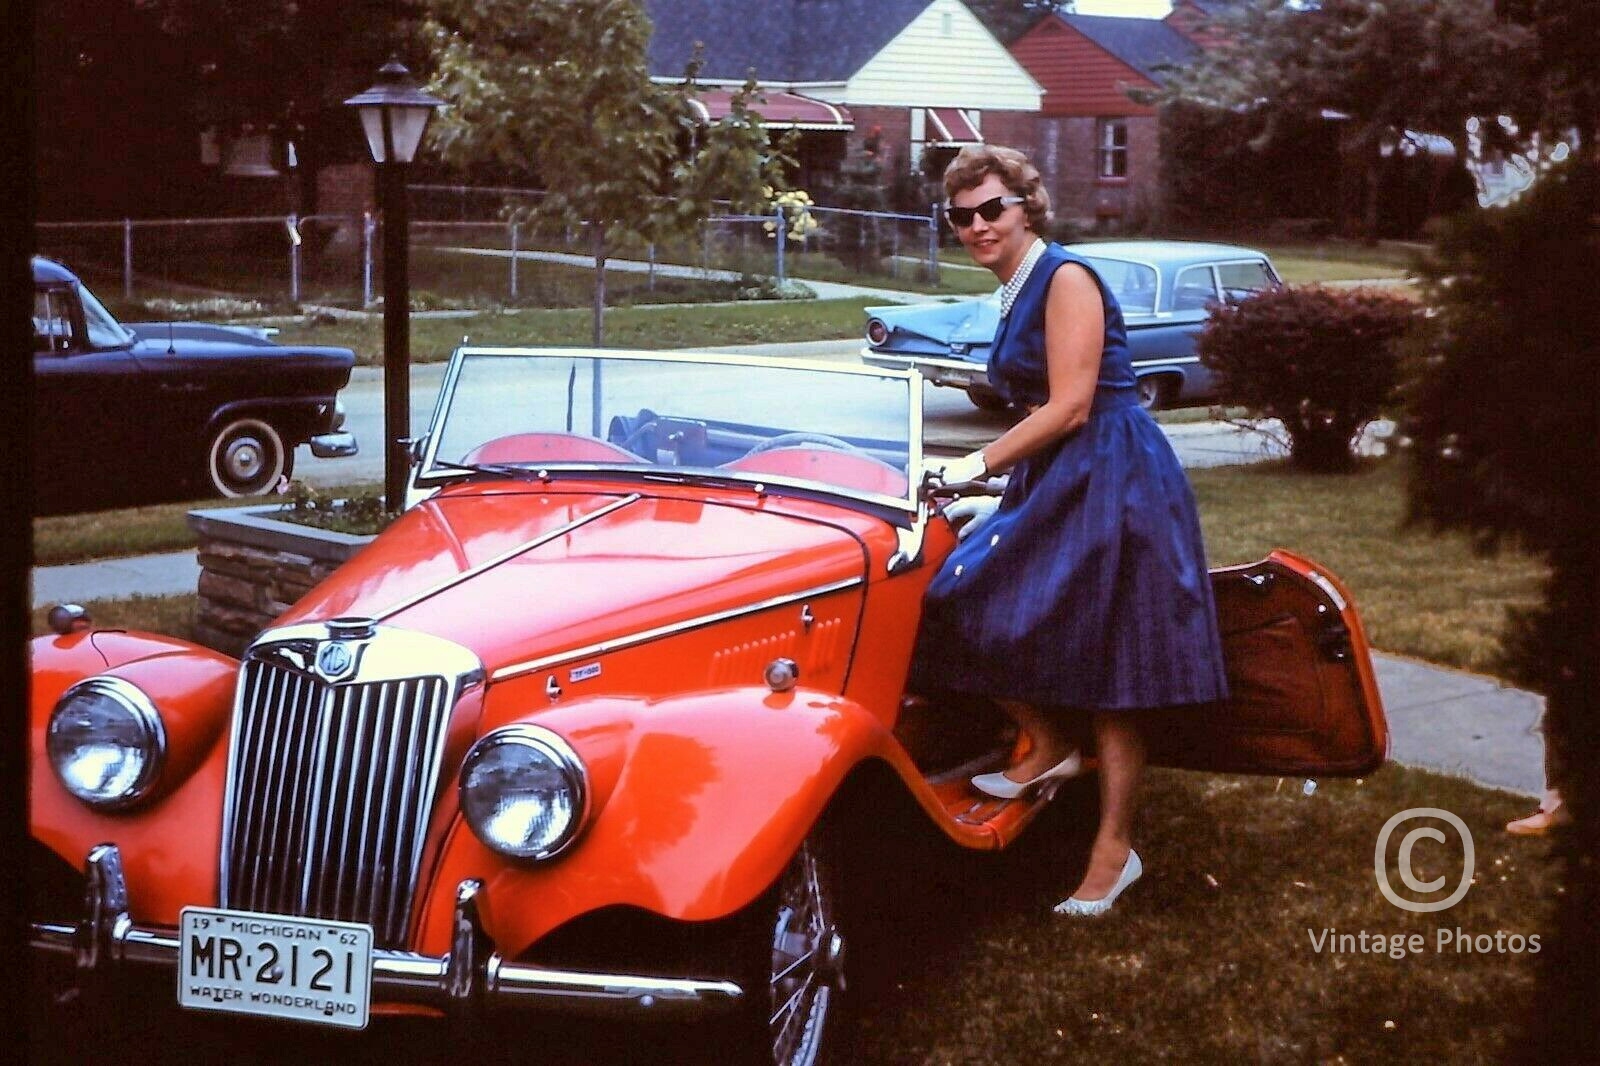 1962 Red MG Sports Car with Michigan Plates